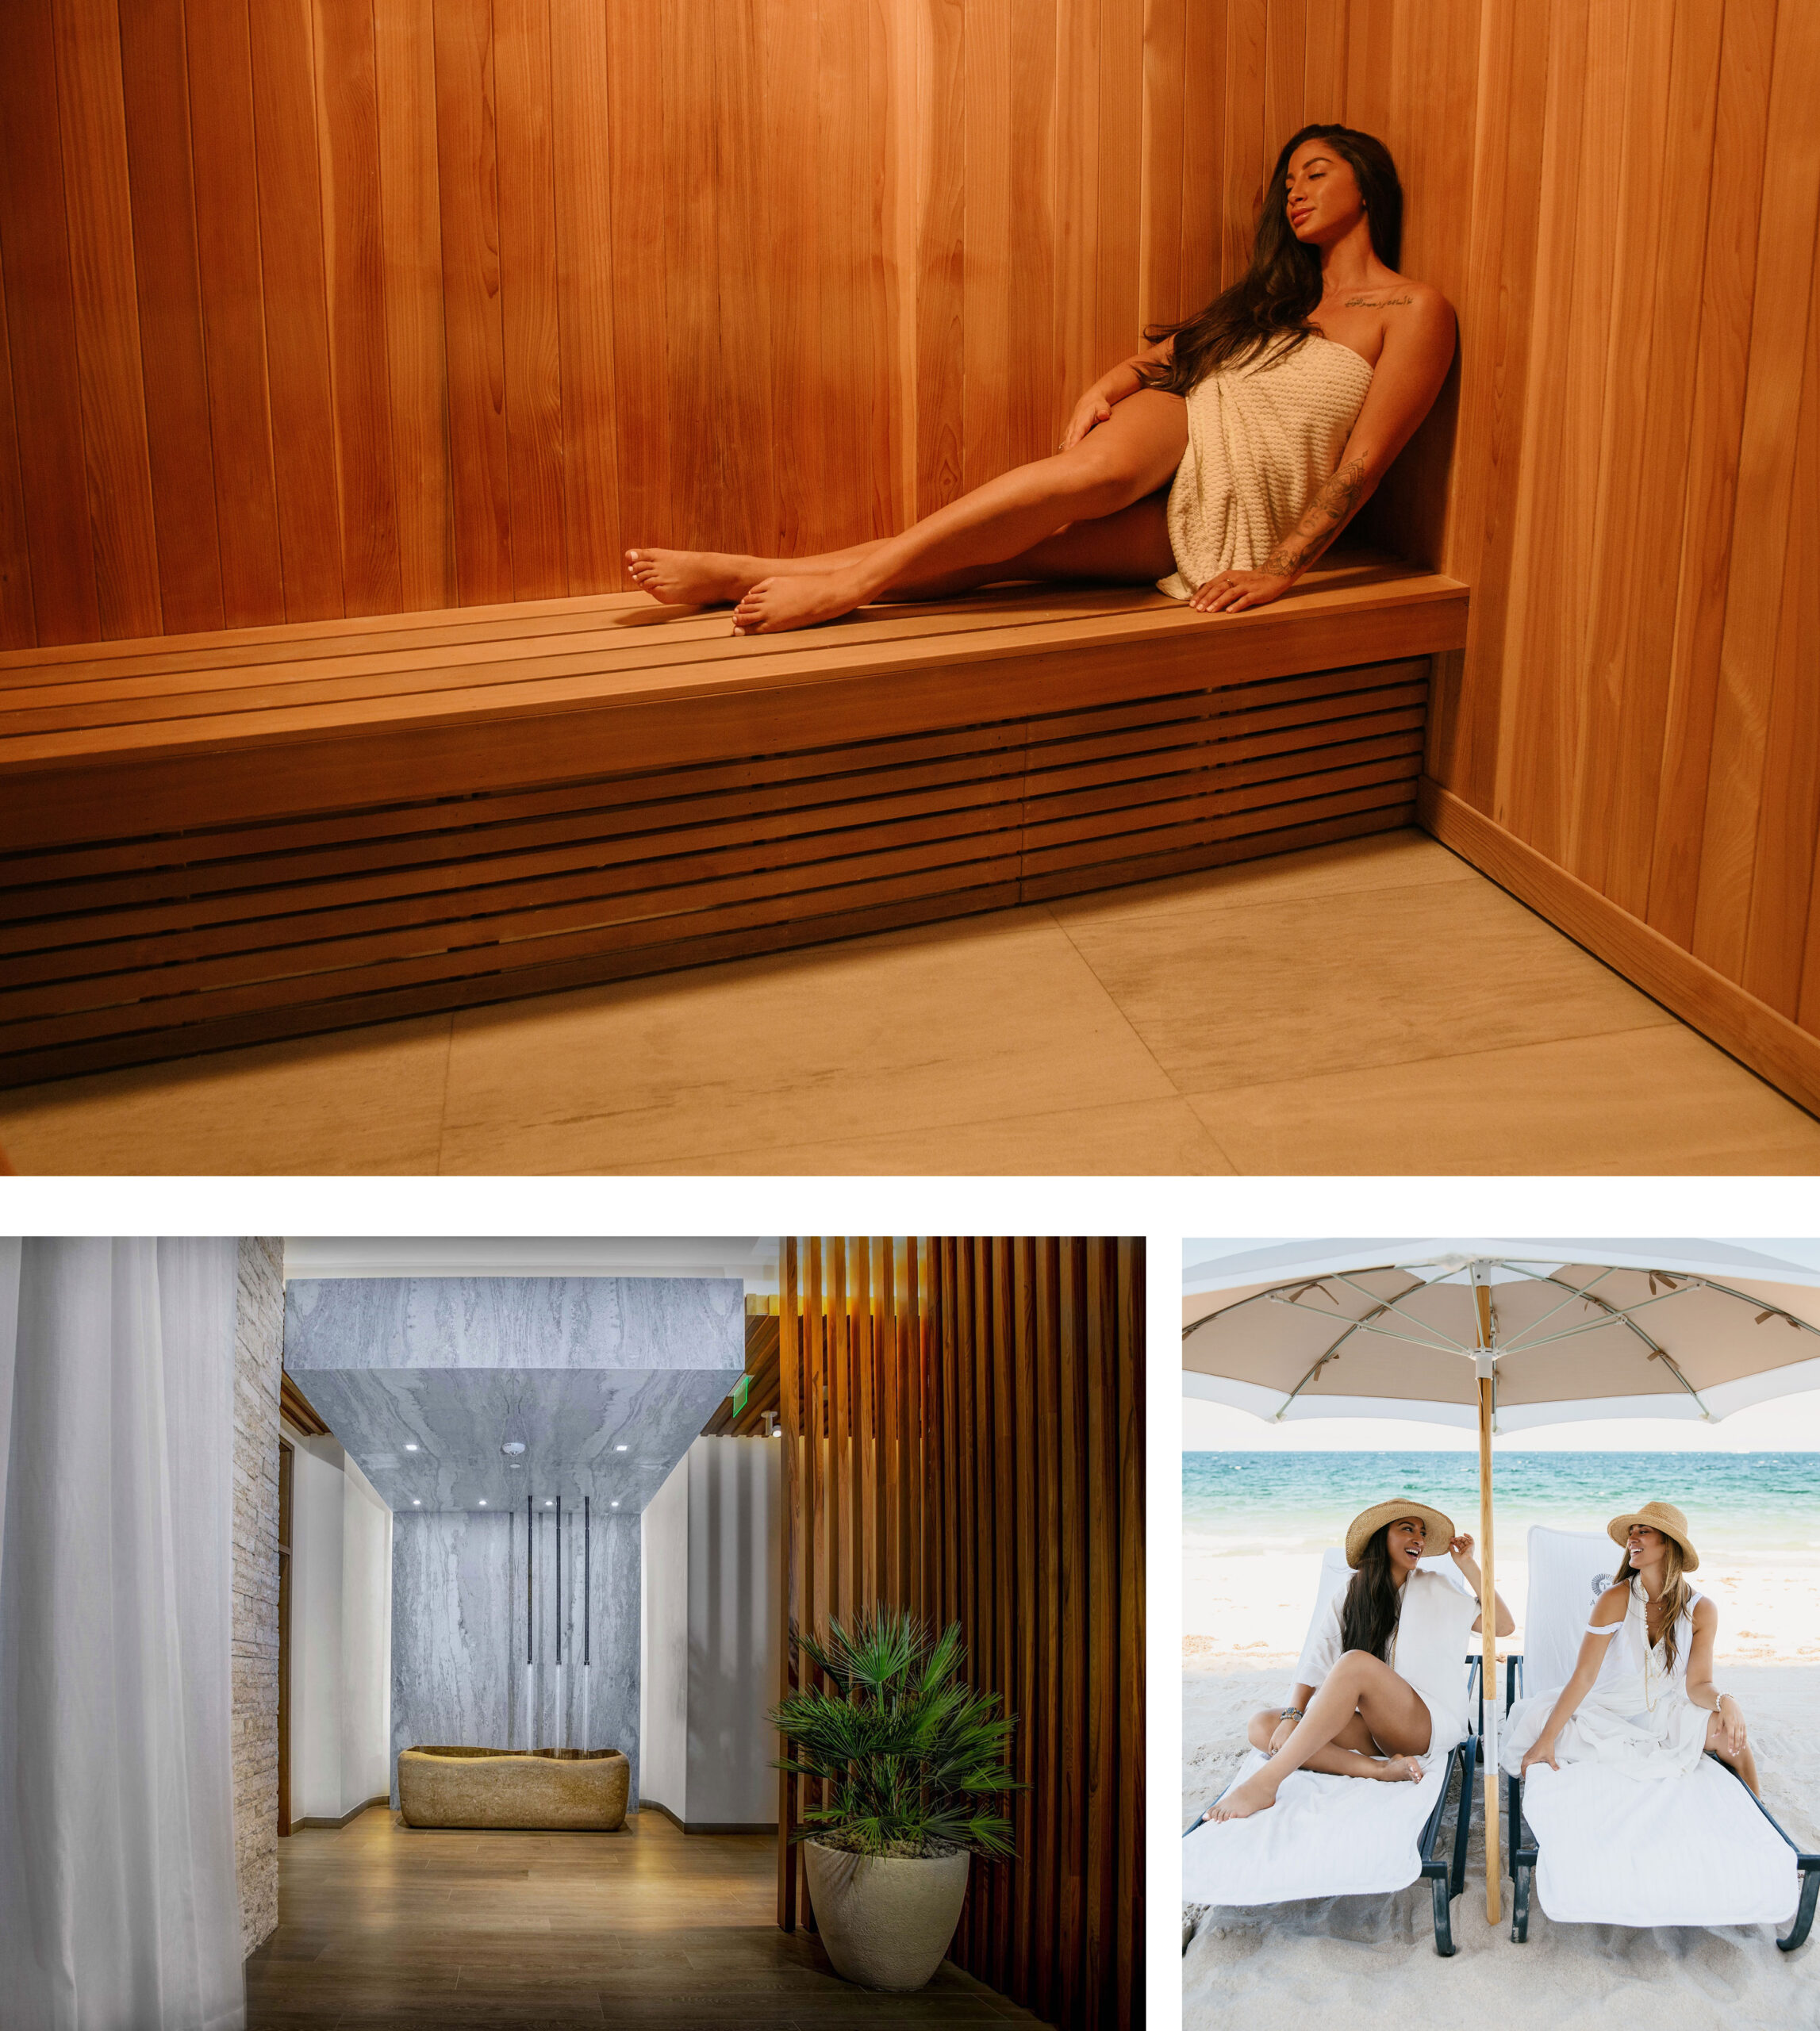 Collage of three pictures showing a woman in a sauna, a modern water fountain sculpture and two women sitting under beach umbrellas.